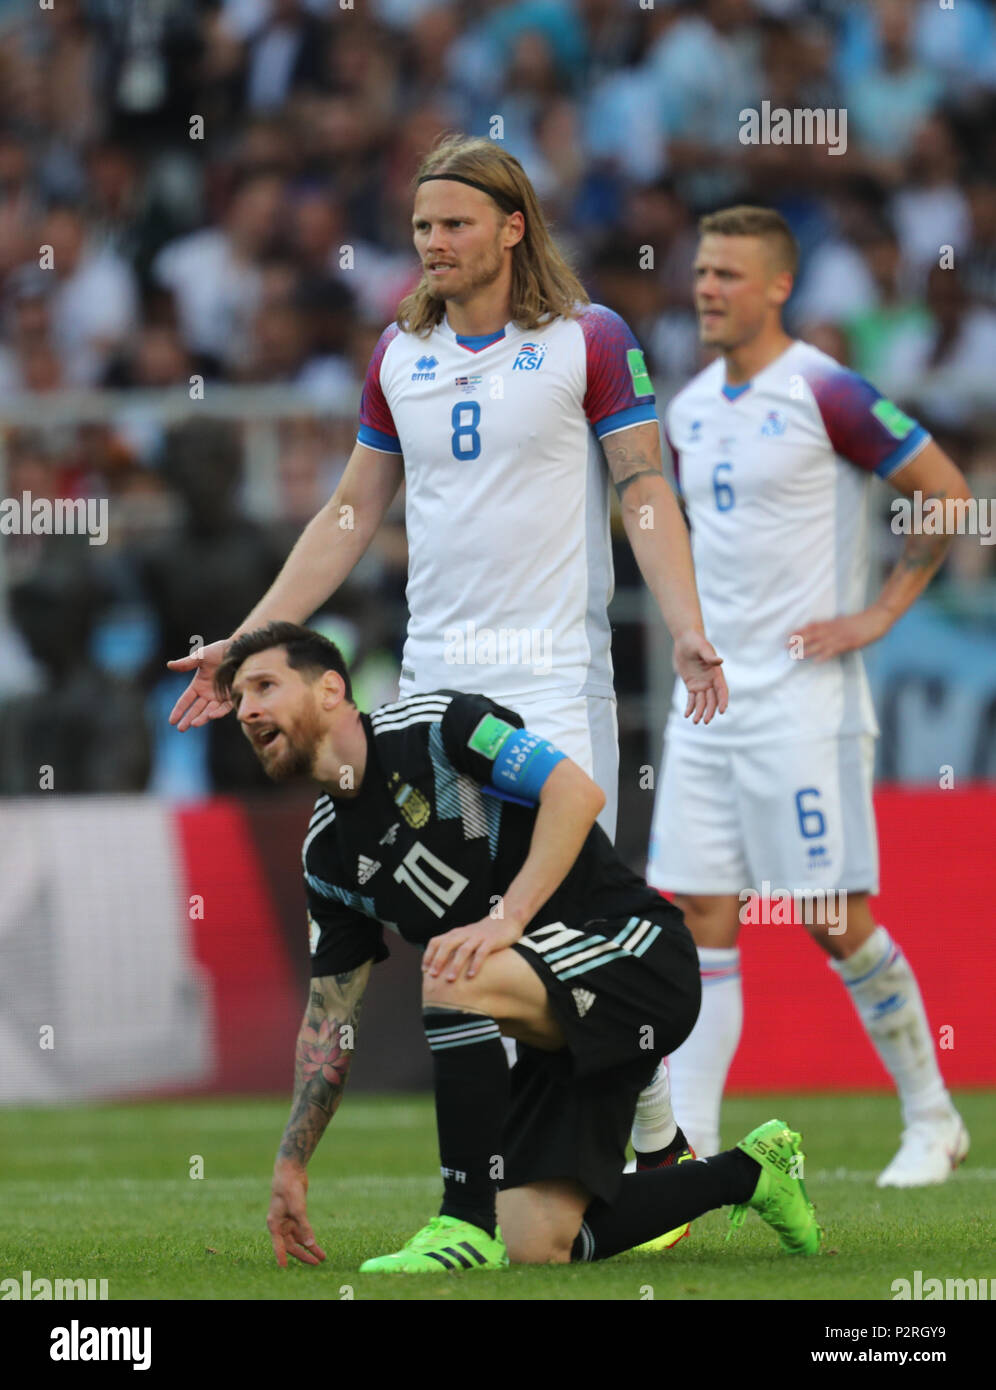 Birkir Bjarnason & Lionel Messi  ARGENTINA V ICELAND  ARGENTINA V ICELAND , 2018 FIFA WORLD CUP RUSSIA  16 June 2018  GBC8152  2018 FIFA World Cup Russia Spartak Stadium Moscow    STRICTLY EDITORIAL USE ONLY.   If The Player/Players Depicted In This Image Is/Are Playing For An English Club Or The England National Team.   Then This Image May Only Be Used For Editorial Purposes. No Commercial Use.    The Following Usages Are Also Restricted EVEN IF IN AN EDITORIAL CONTEXT:   Use in conjuction with, or part of, any unauthorized audio, video, data, fixture lists, club/league logos, Betting, Games  Stock Photo